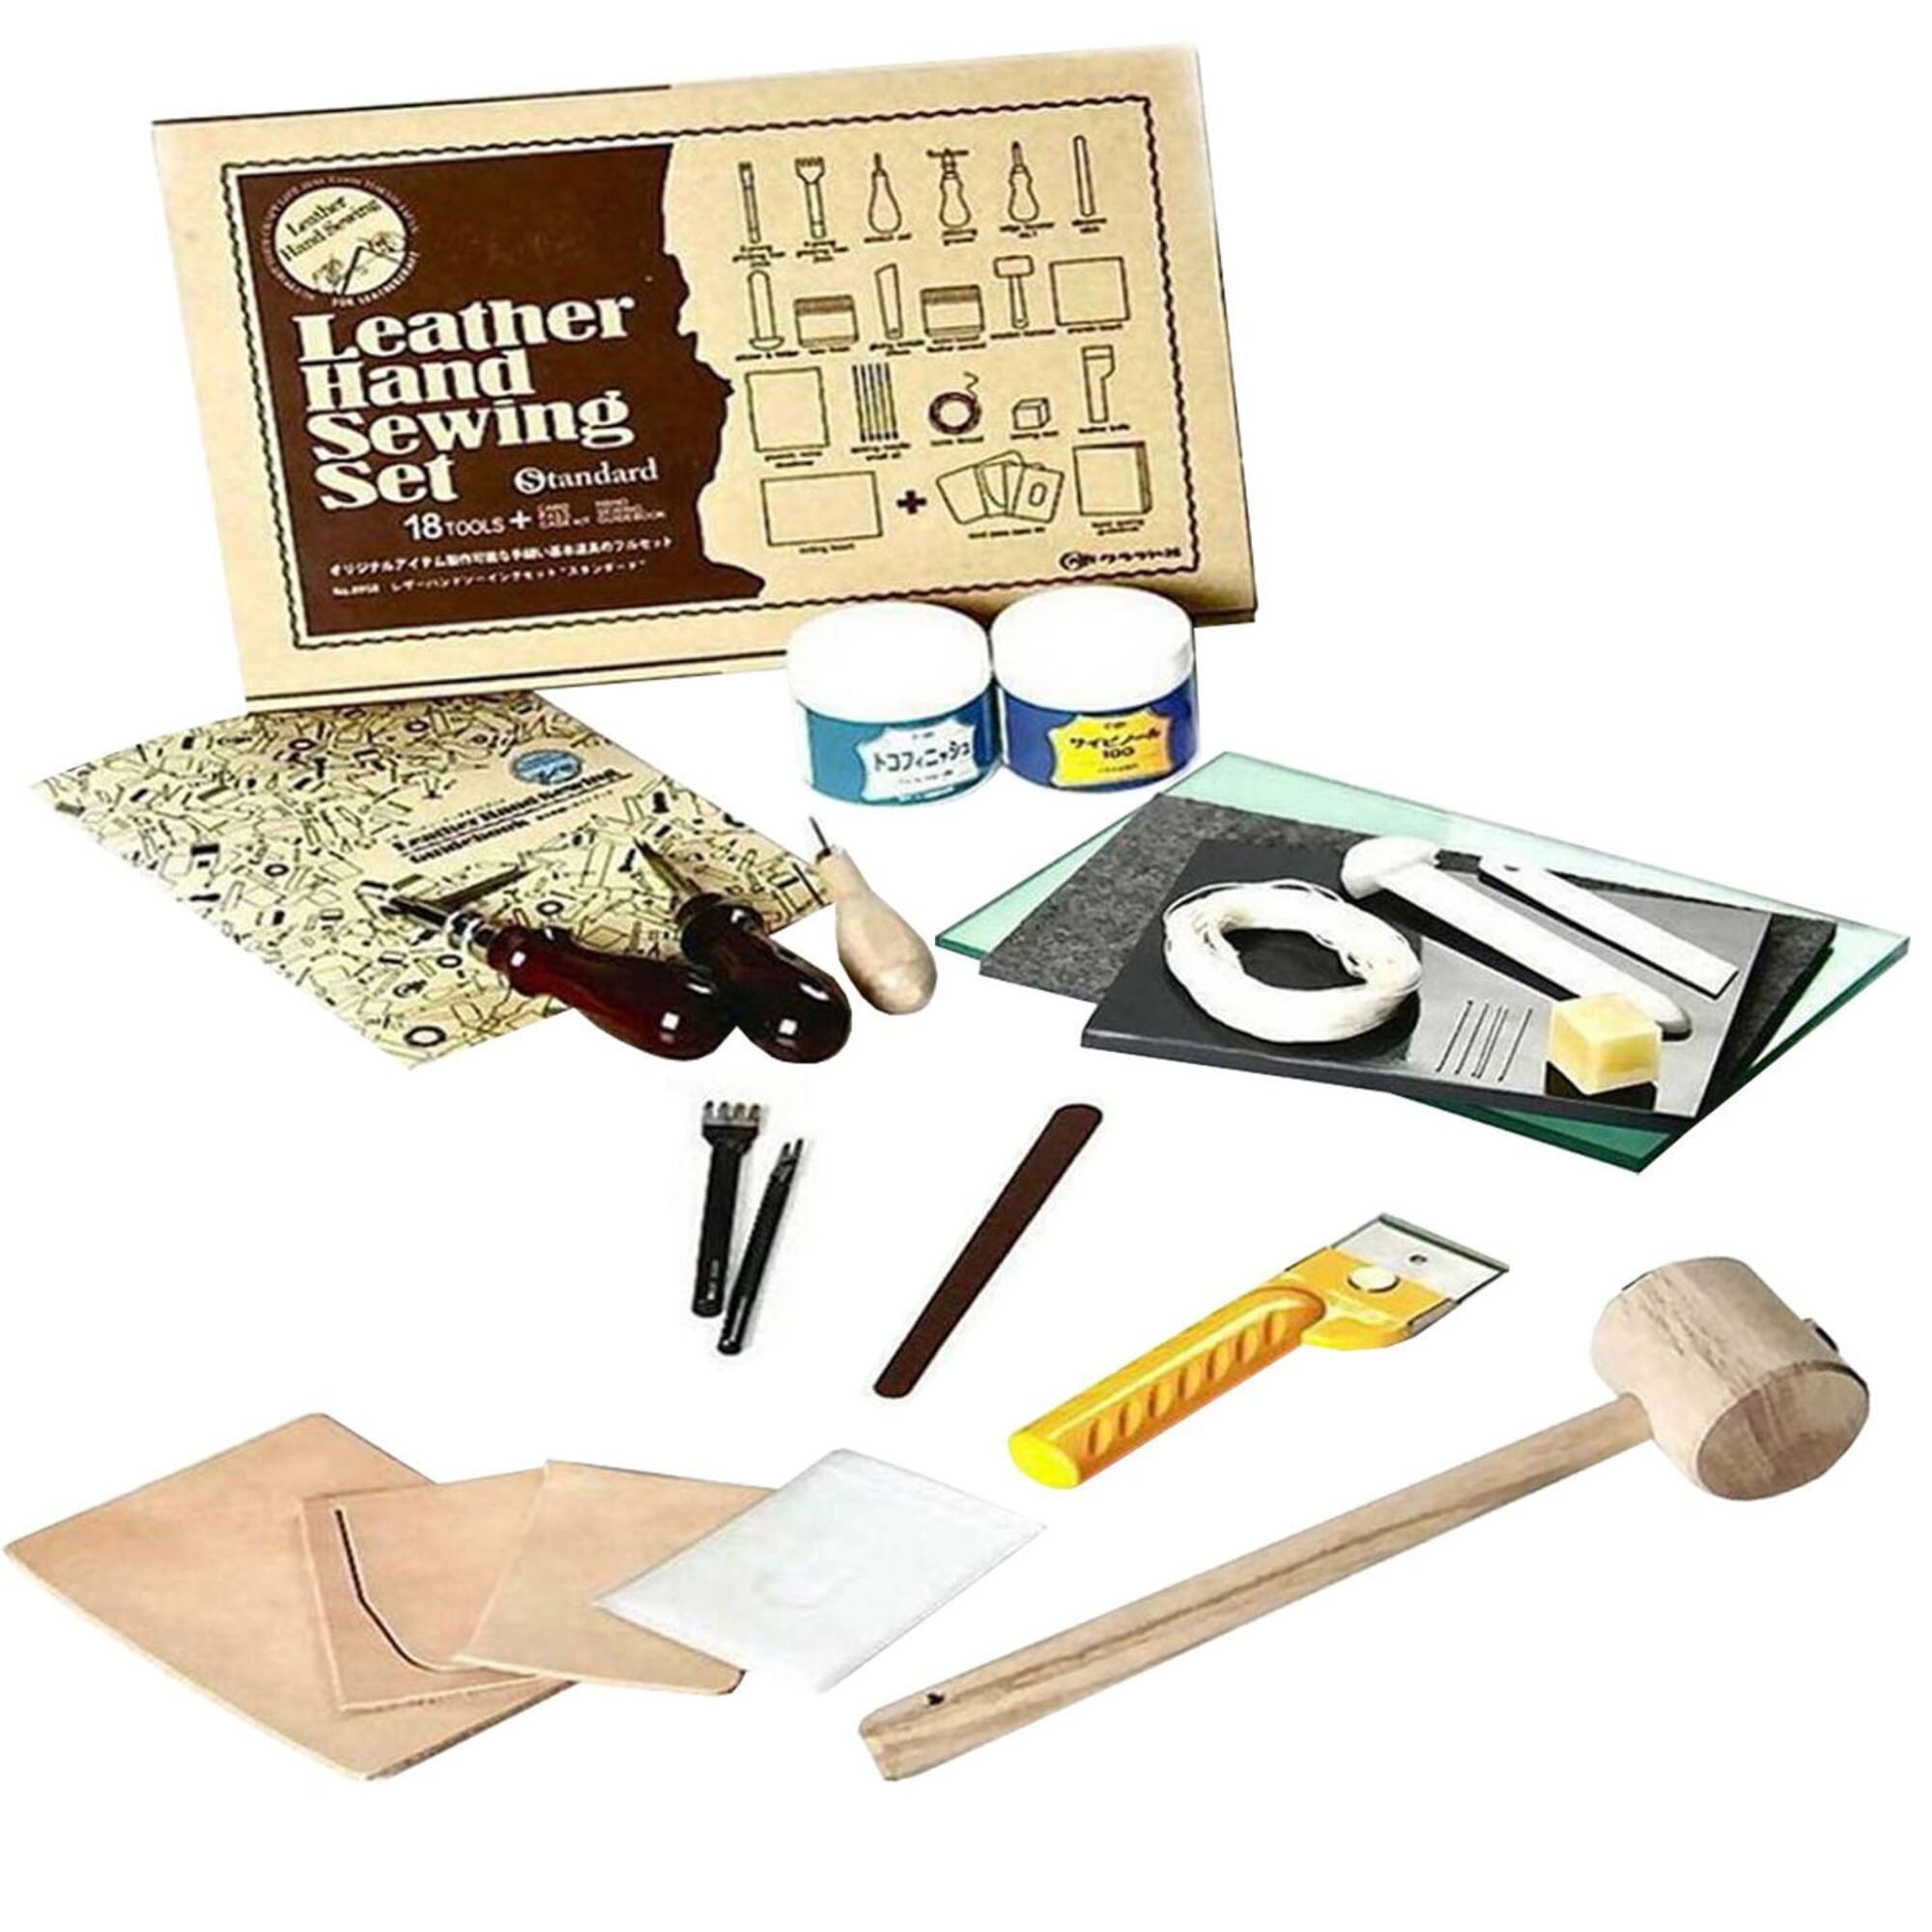 Tandy-Leather Tools South Africa  Buy Tandy-Leather Tools Online